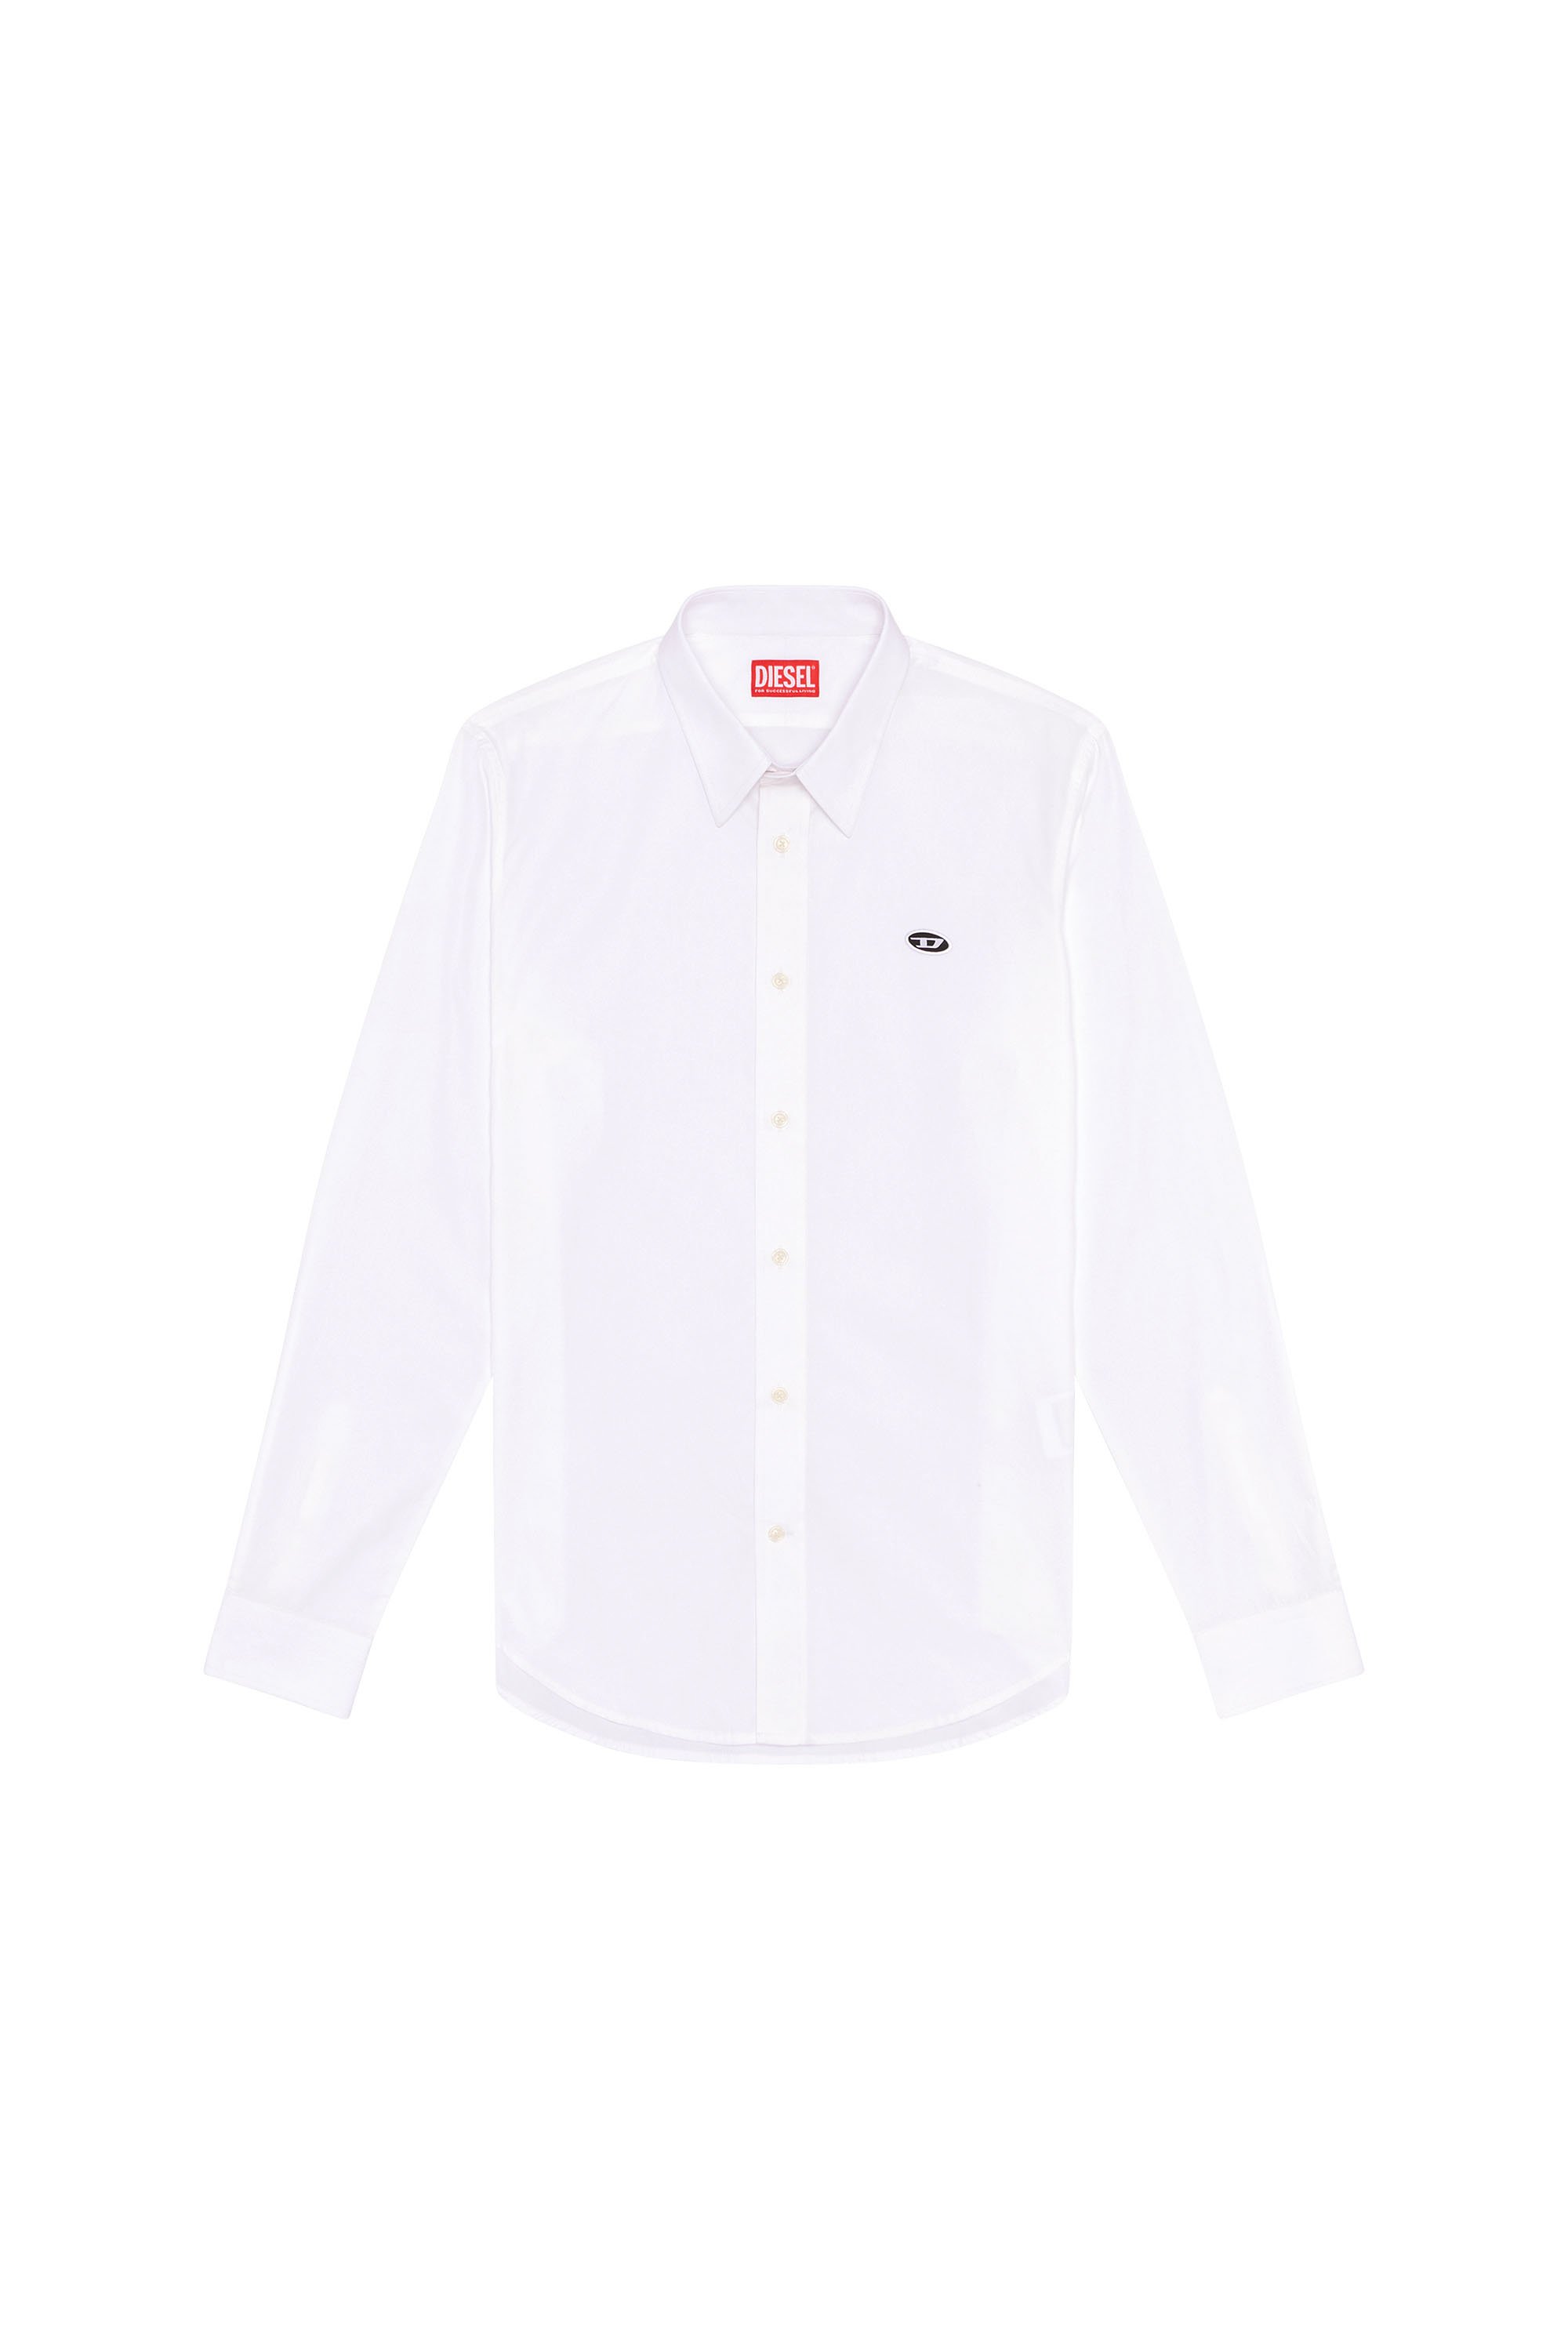 Diesel - S-BENNY-A, Man Shirt with oval D patch in White - Image 3